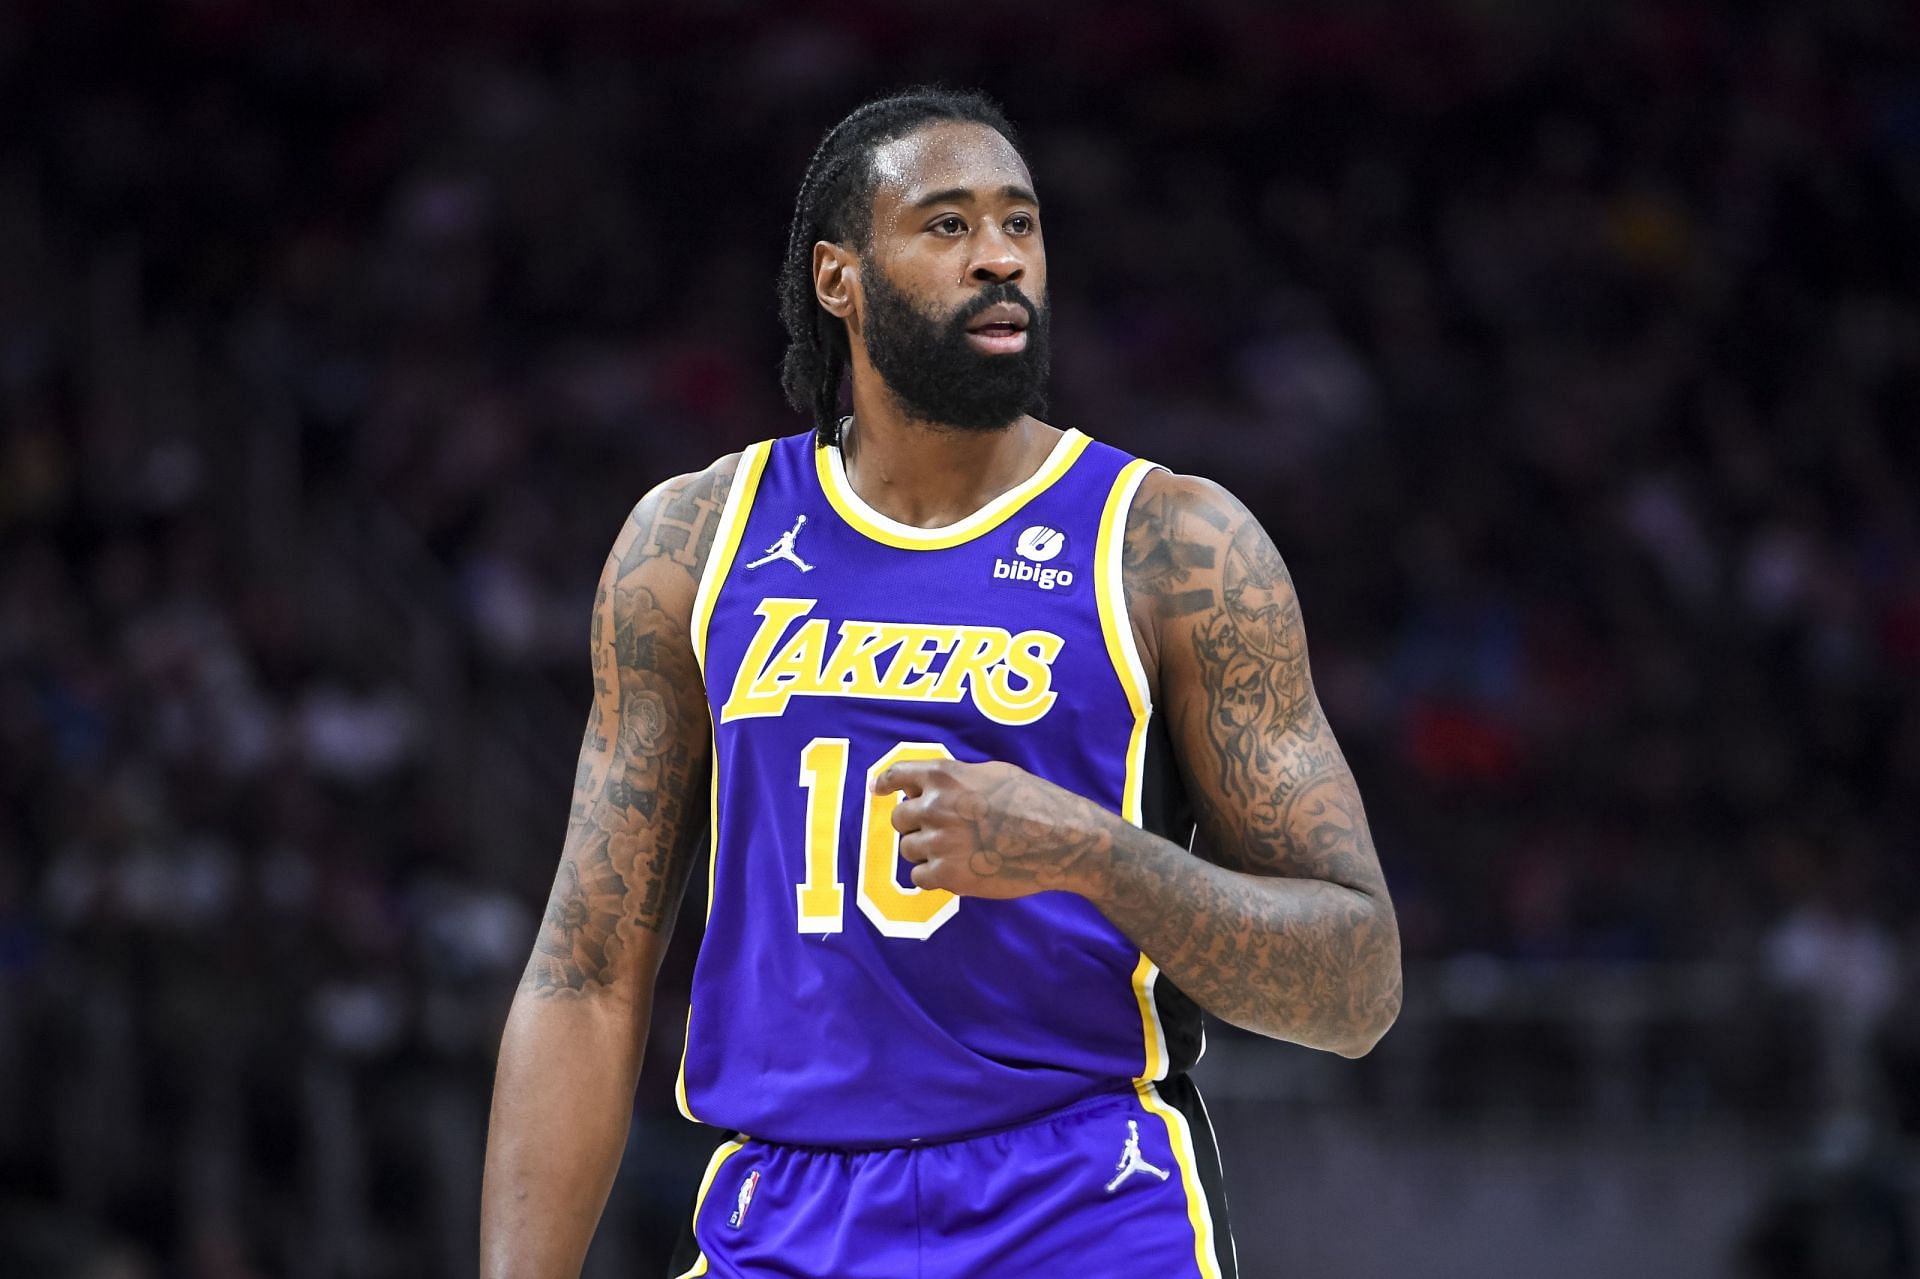 DeAndre Jordan left Nets for Lakers to 'compete' - Silver Screen and Roll